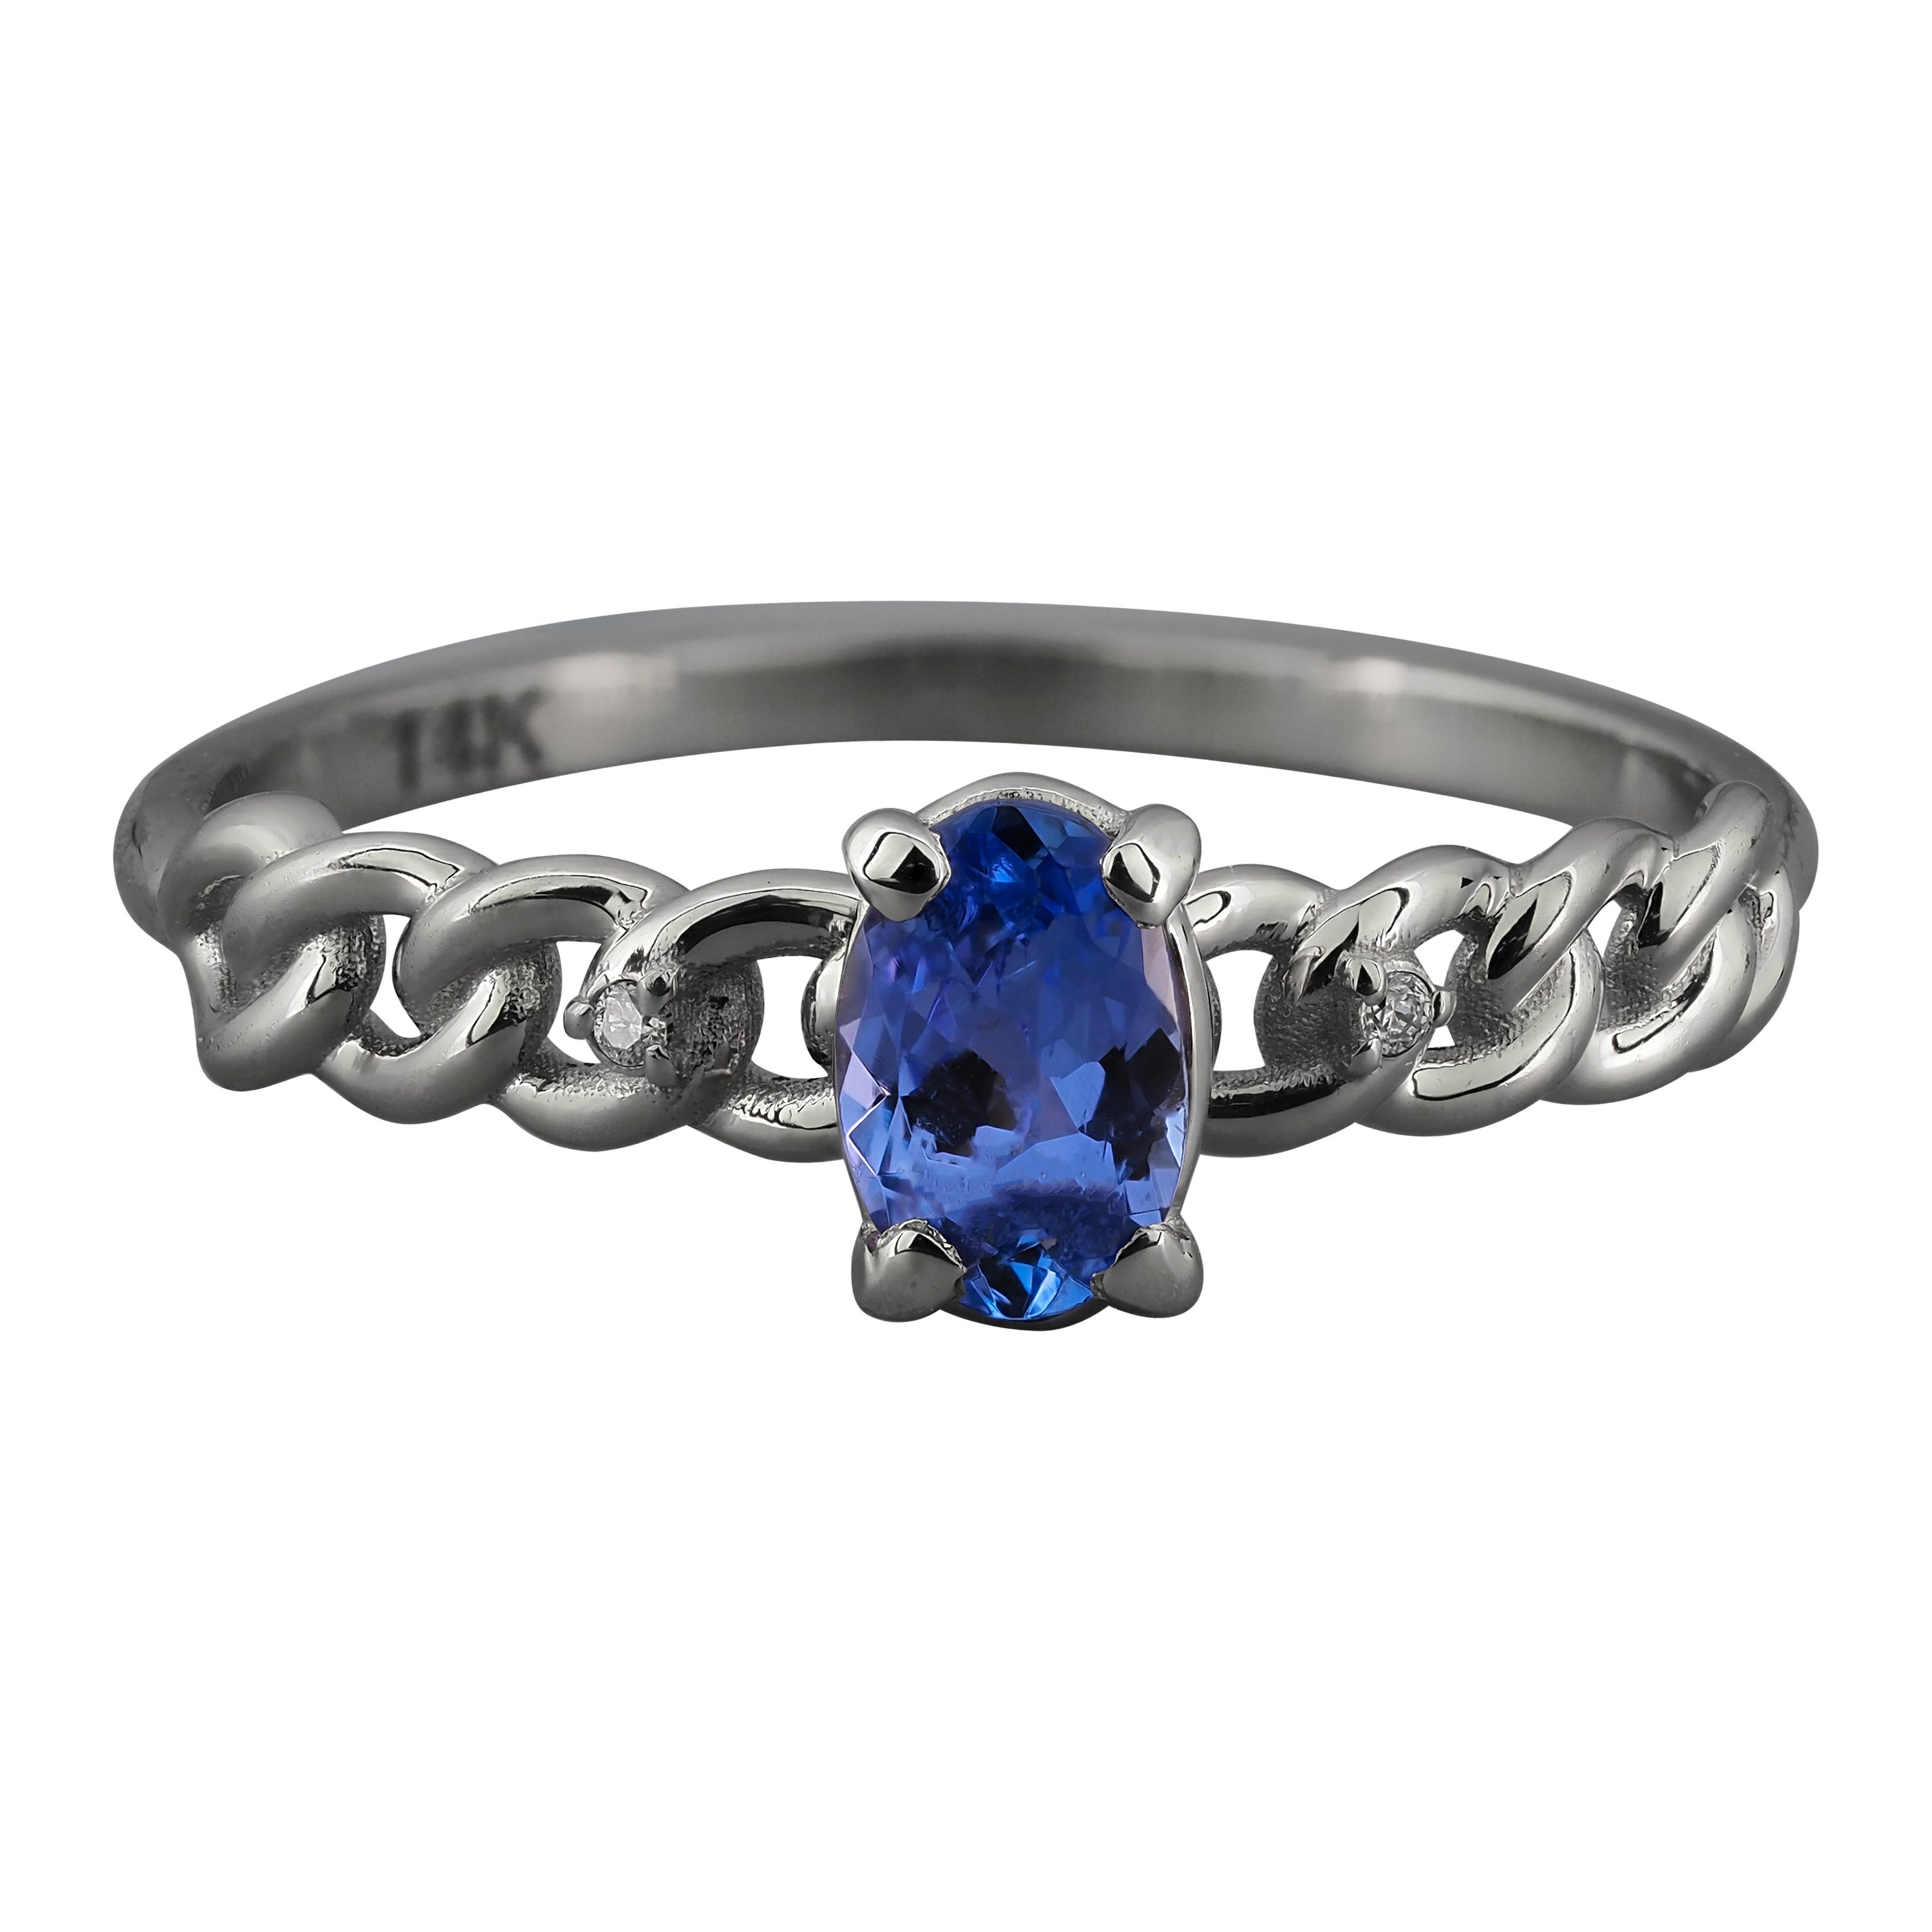 14k Gold Ring with Tanzanite and Diamonds!